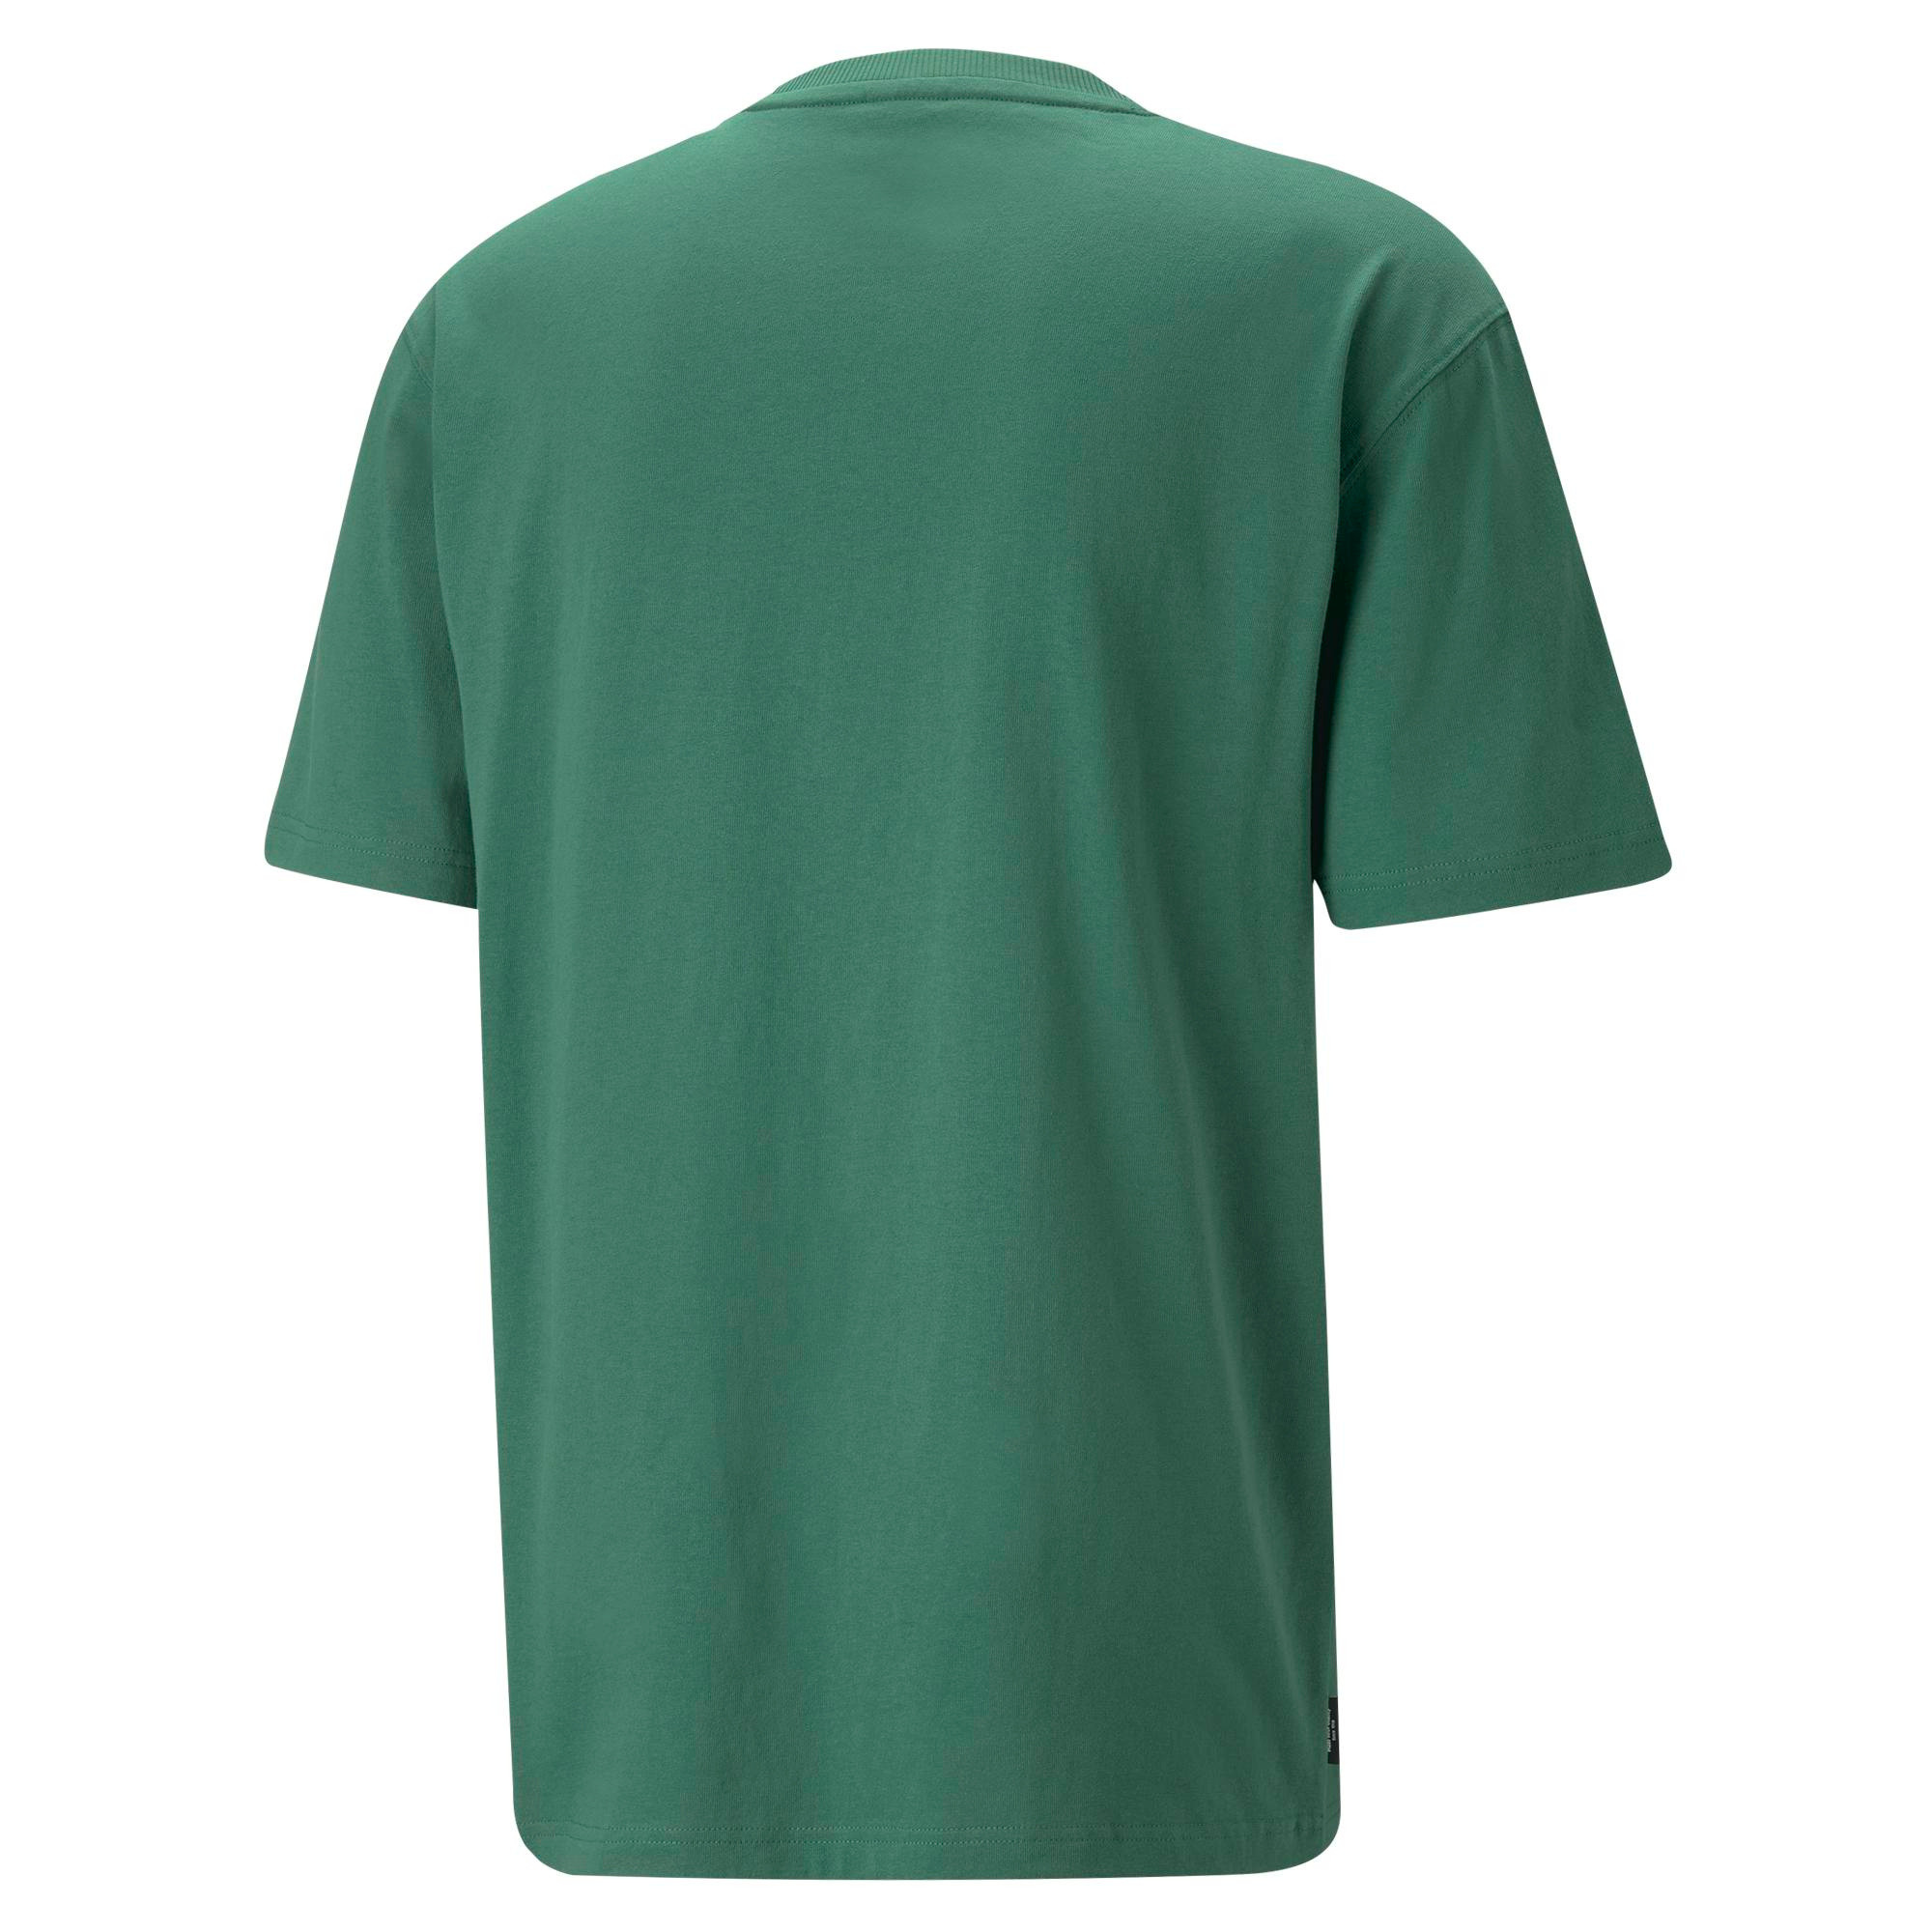 Puma - T-shirt in cotone con logo, Verde, large image number 1